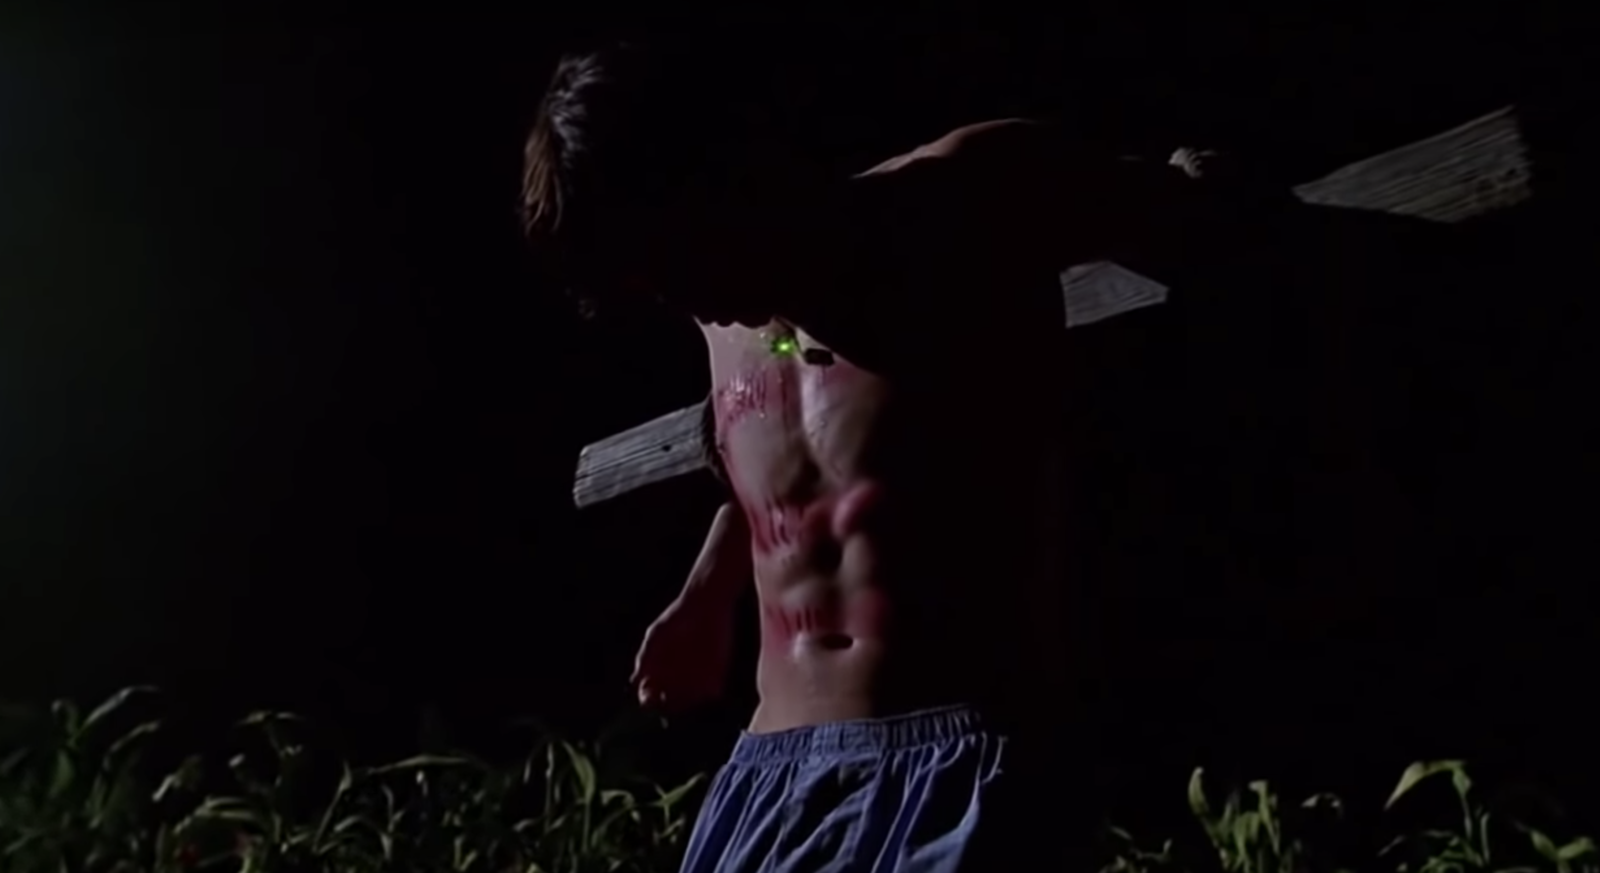 Tom Welling hanging from a cross shirtless